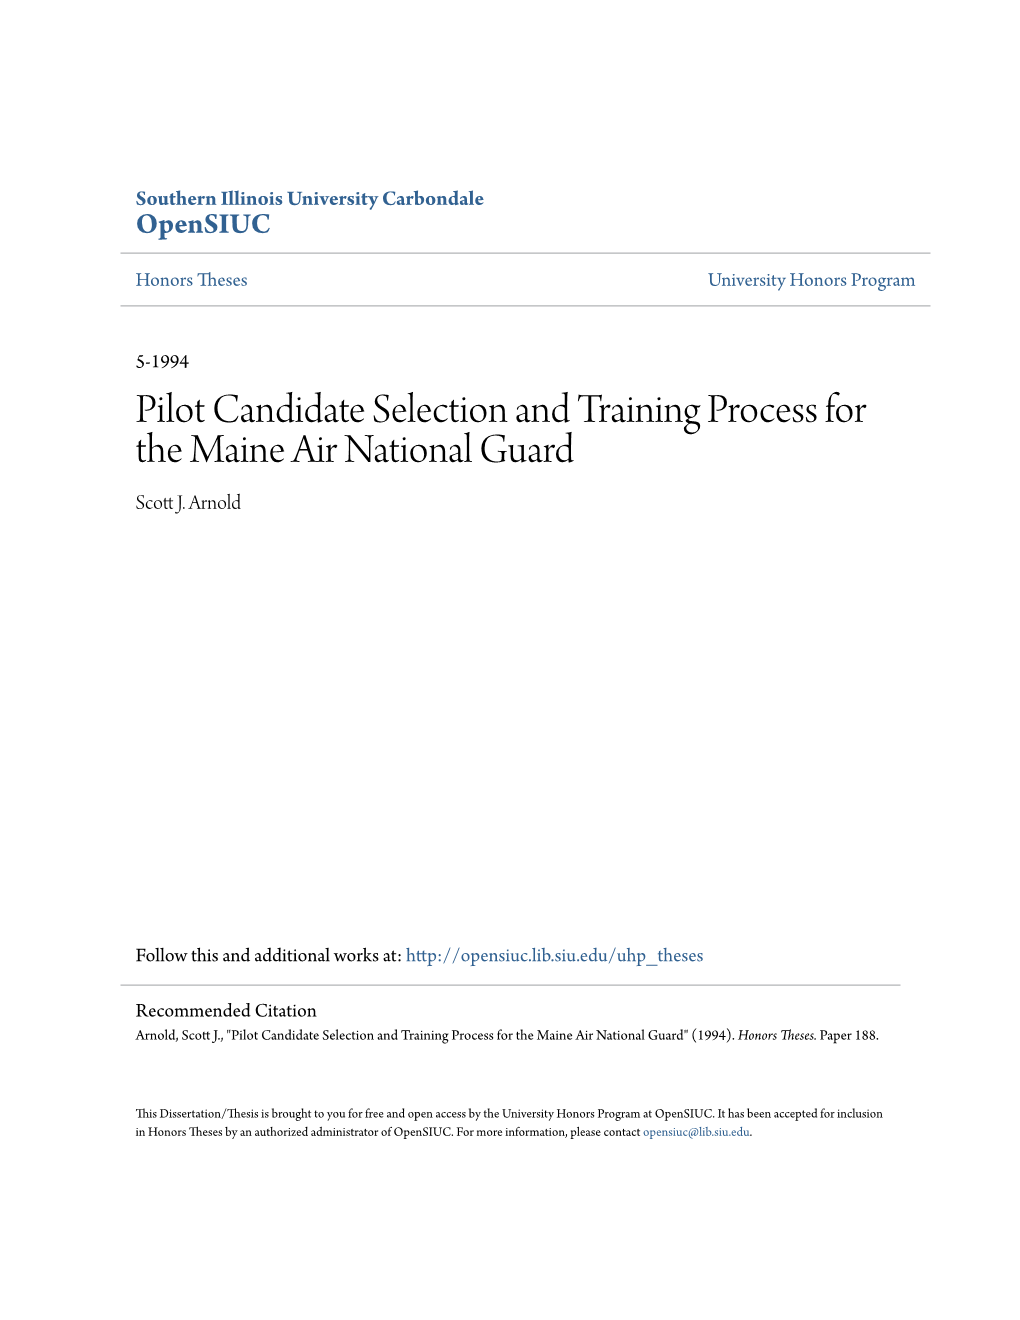 Pilot Candidate Selection and Training Process for the Maine Air National Guard Scott .J Arnold